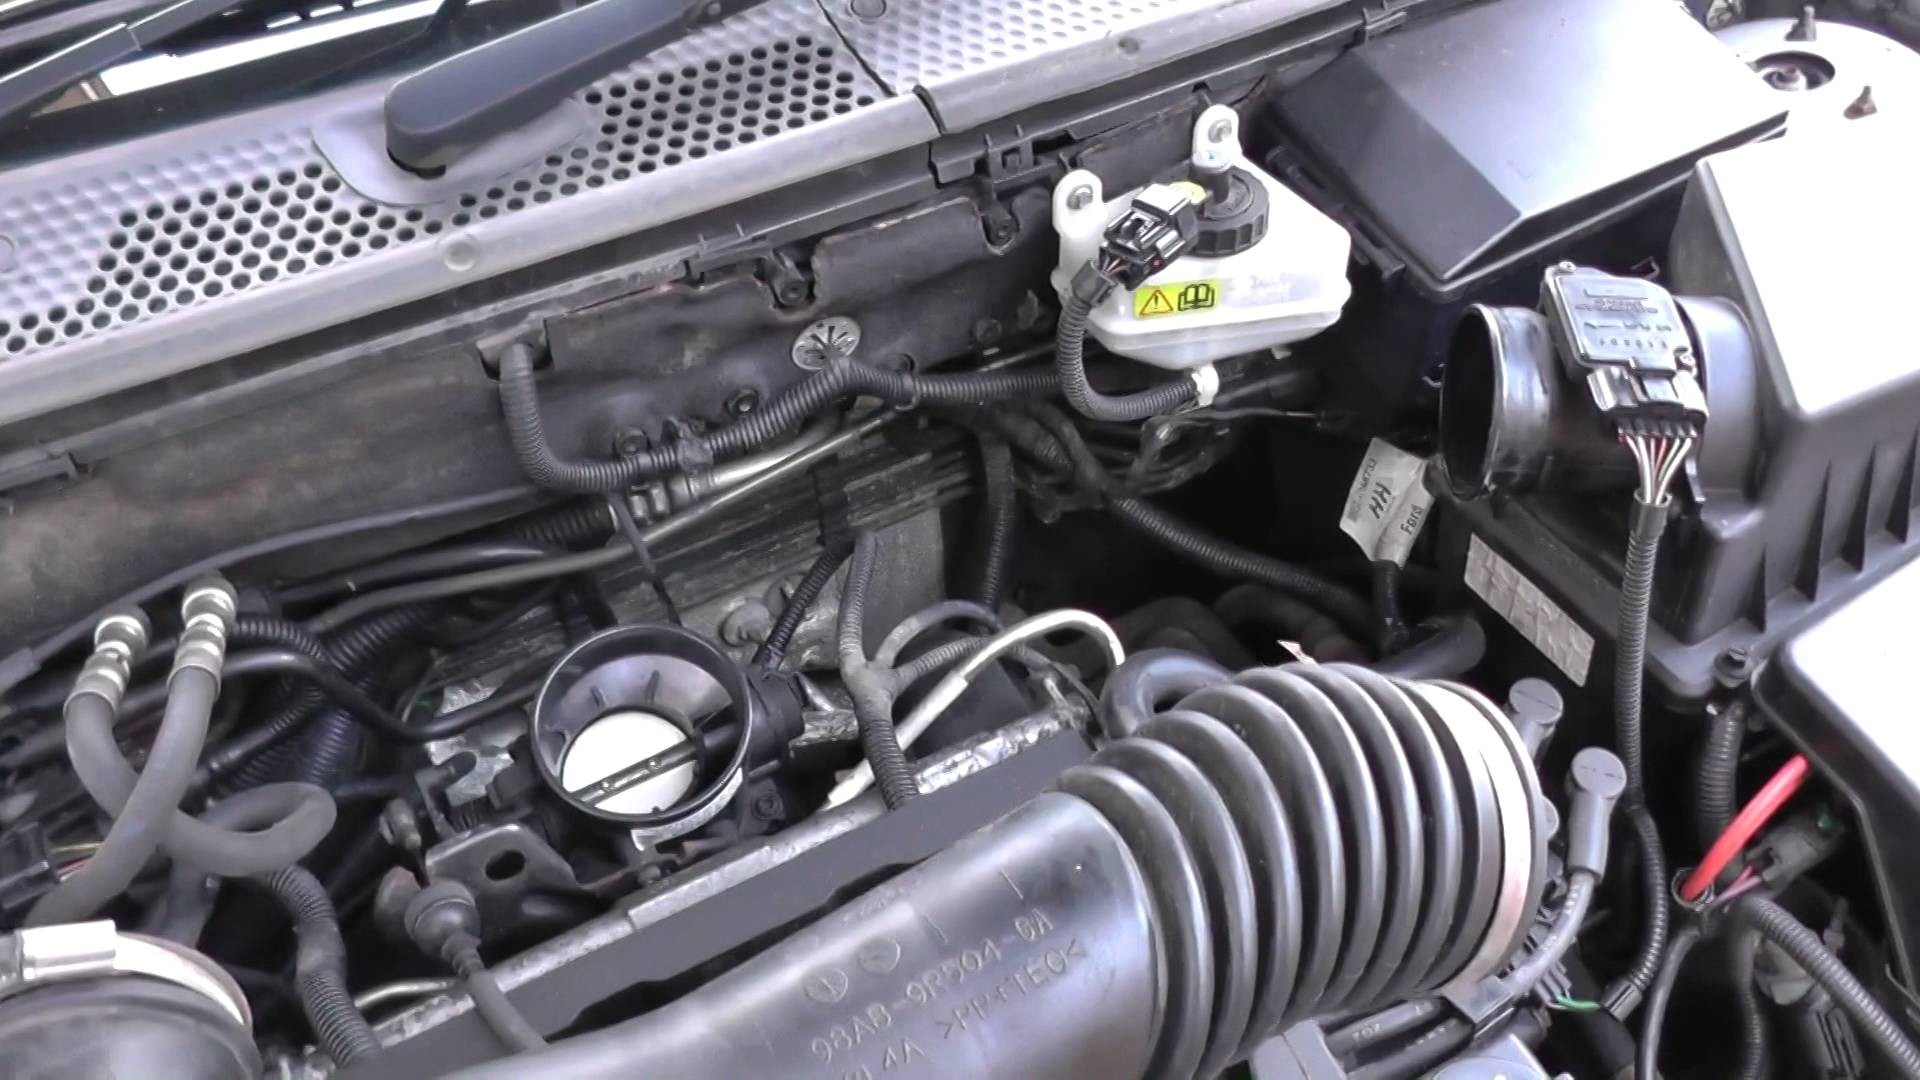 Ford Ka Engine Diagram ford Focus Abs Pump & Module Location Video Guide Of Ford Ka Engine Diagram